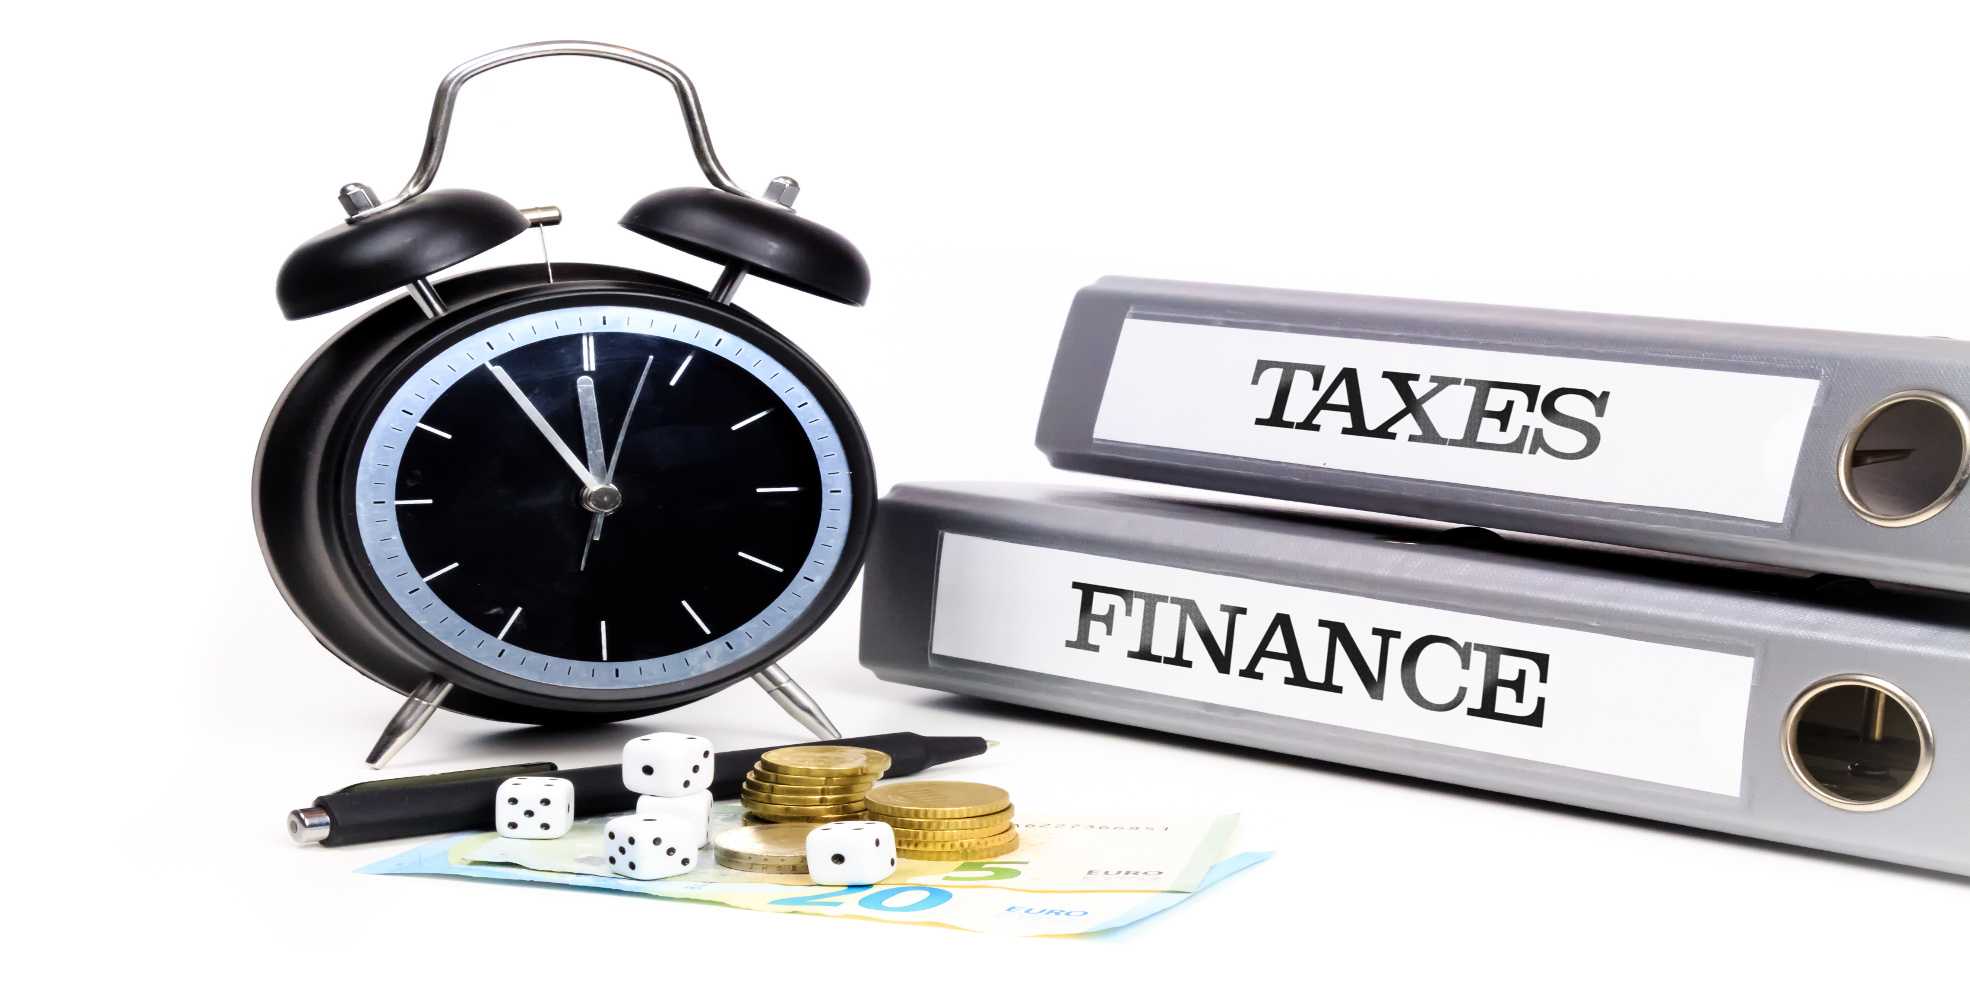 File folders and alarm clock symbolize time pressure while working on taxes and finance.